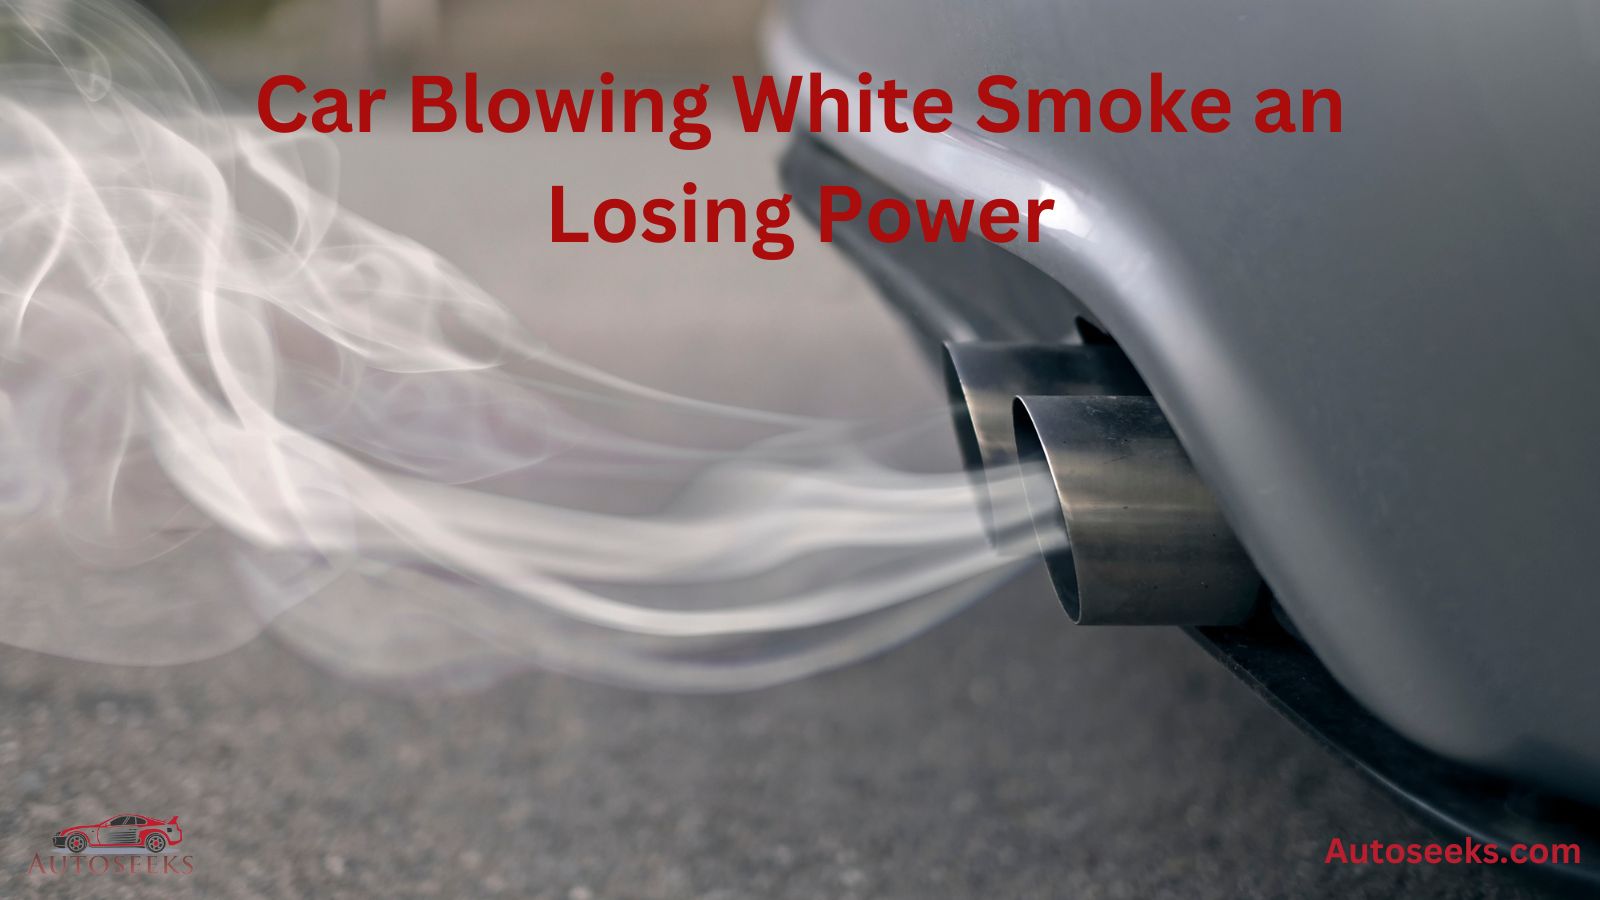 car blowing white smoke and losing power